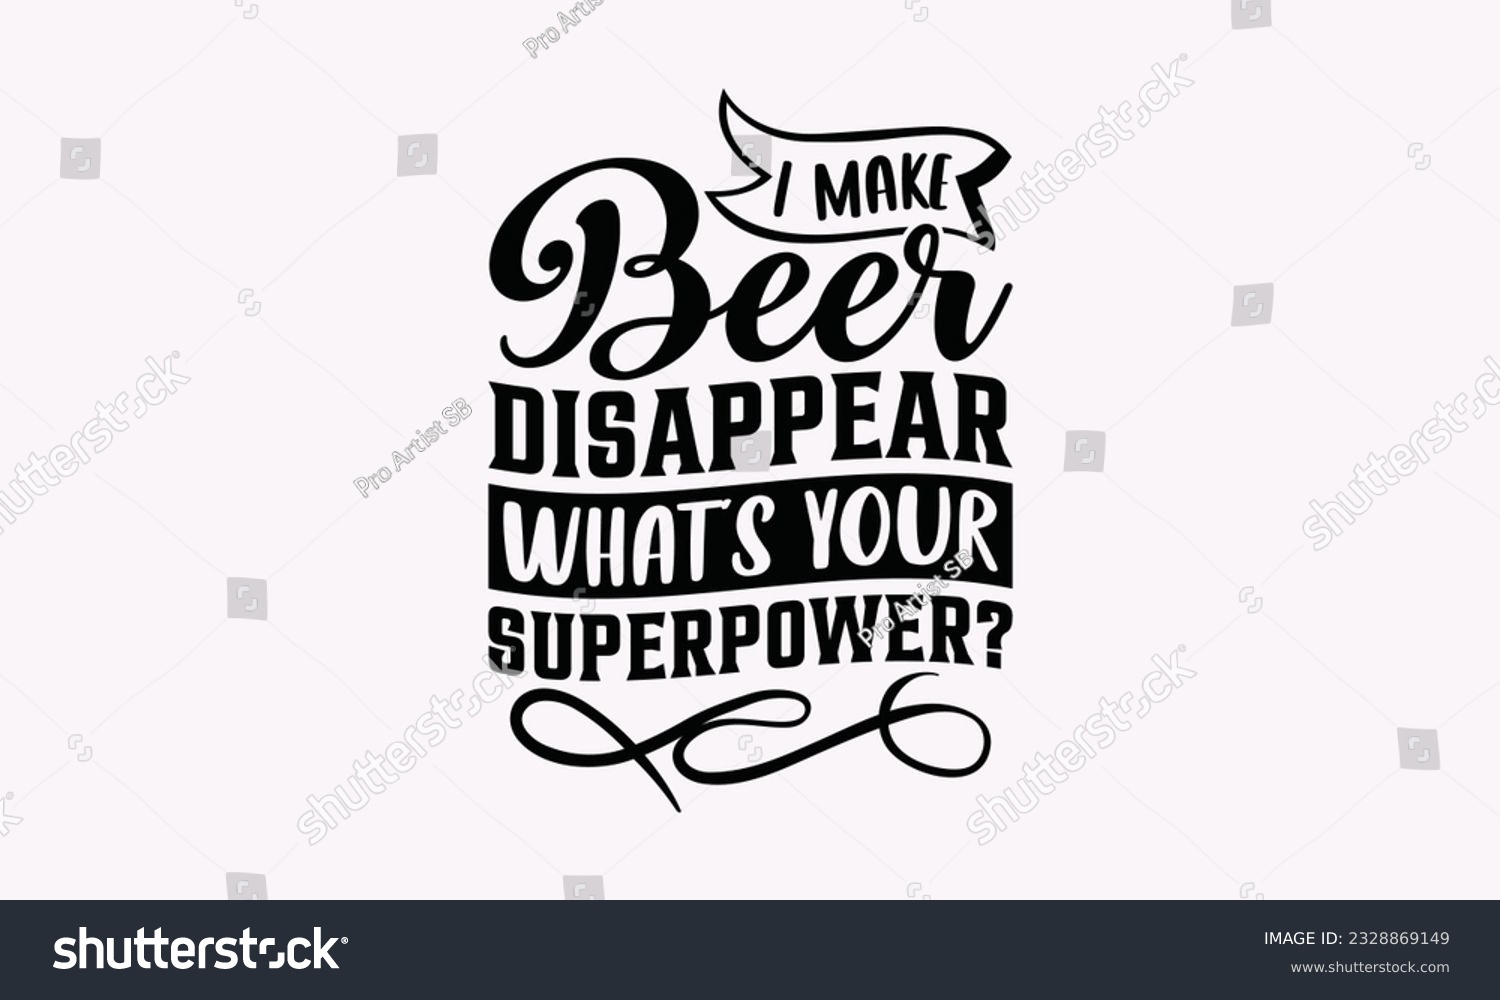 SVG of I Make Beer Disappear What’s Your Superpower? - Alcohol SVG Design, Cheer Quotes, Hand drawn lettering phrase, Isolated on white background. svg